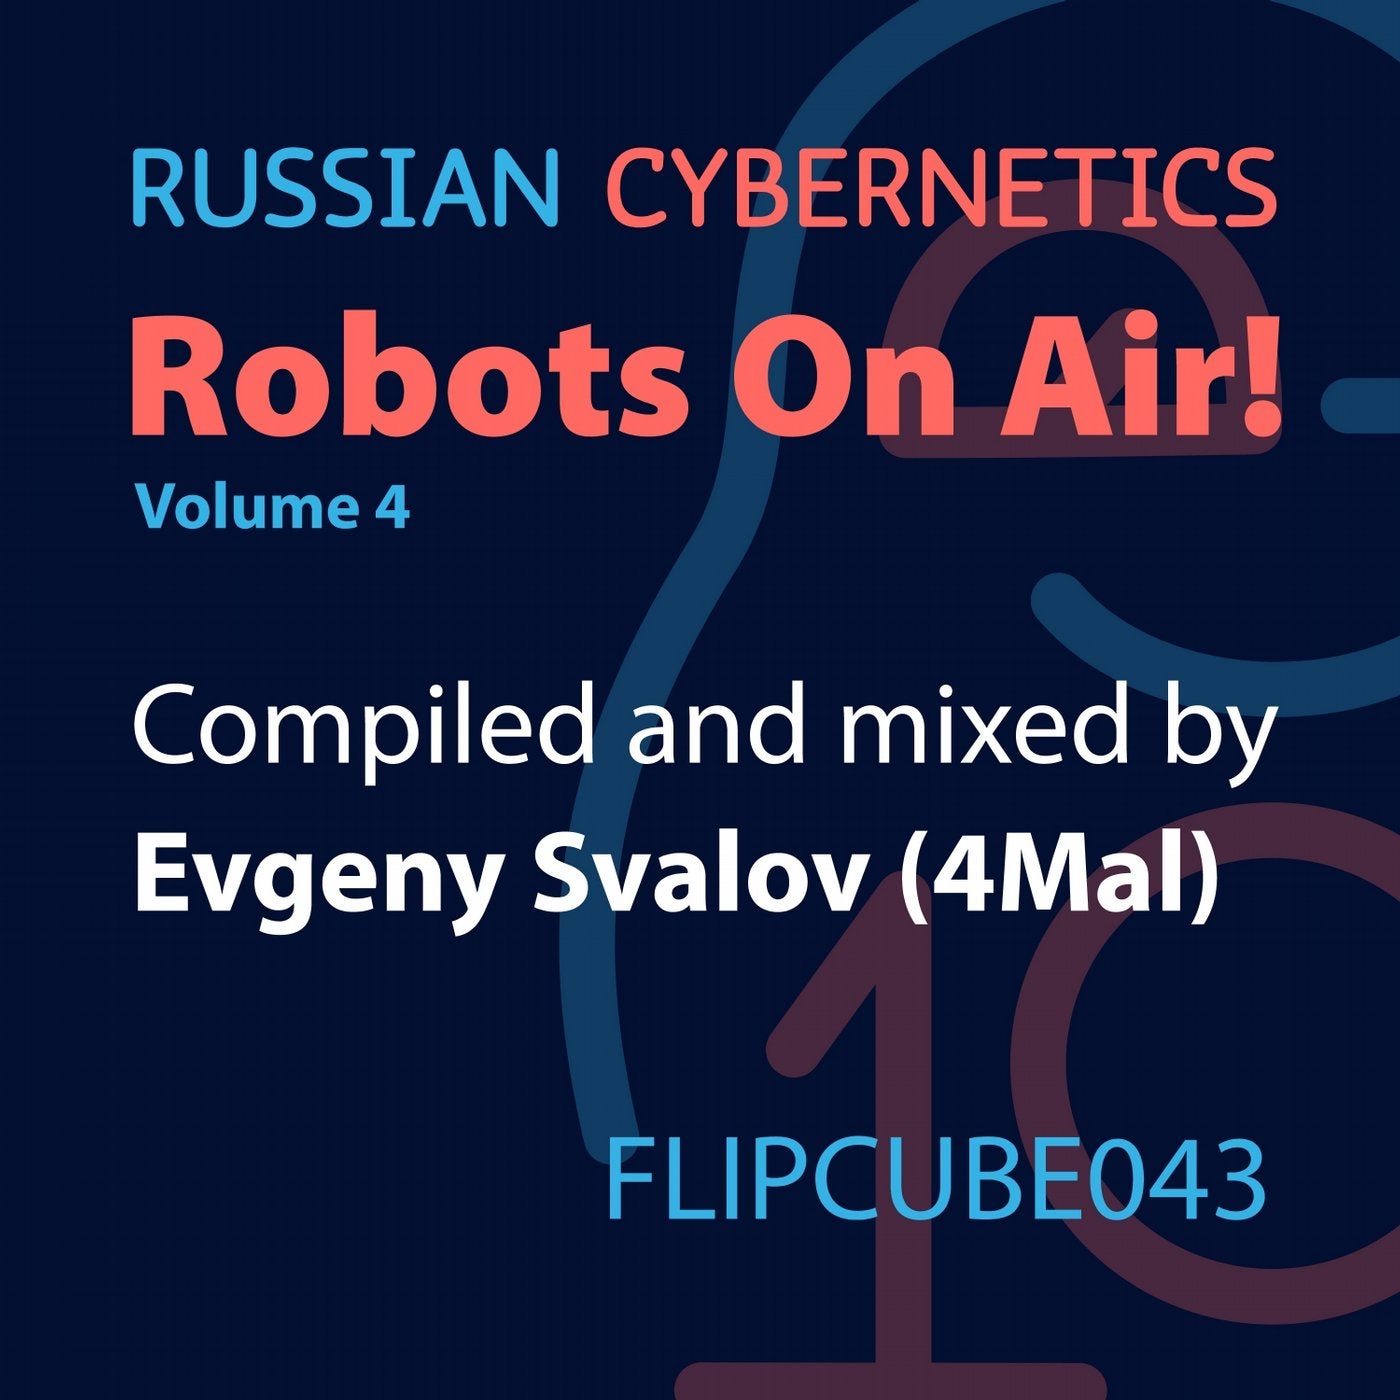 Russian Cybernetics - Robots on Air!, Vol. 4 - Compiled and Mixed by Evgeny Svalov (4Mal)